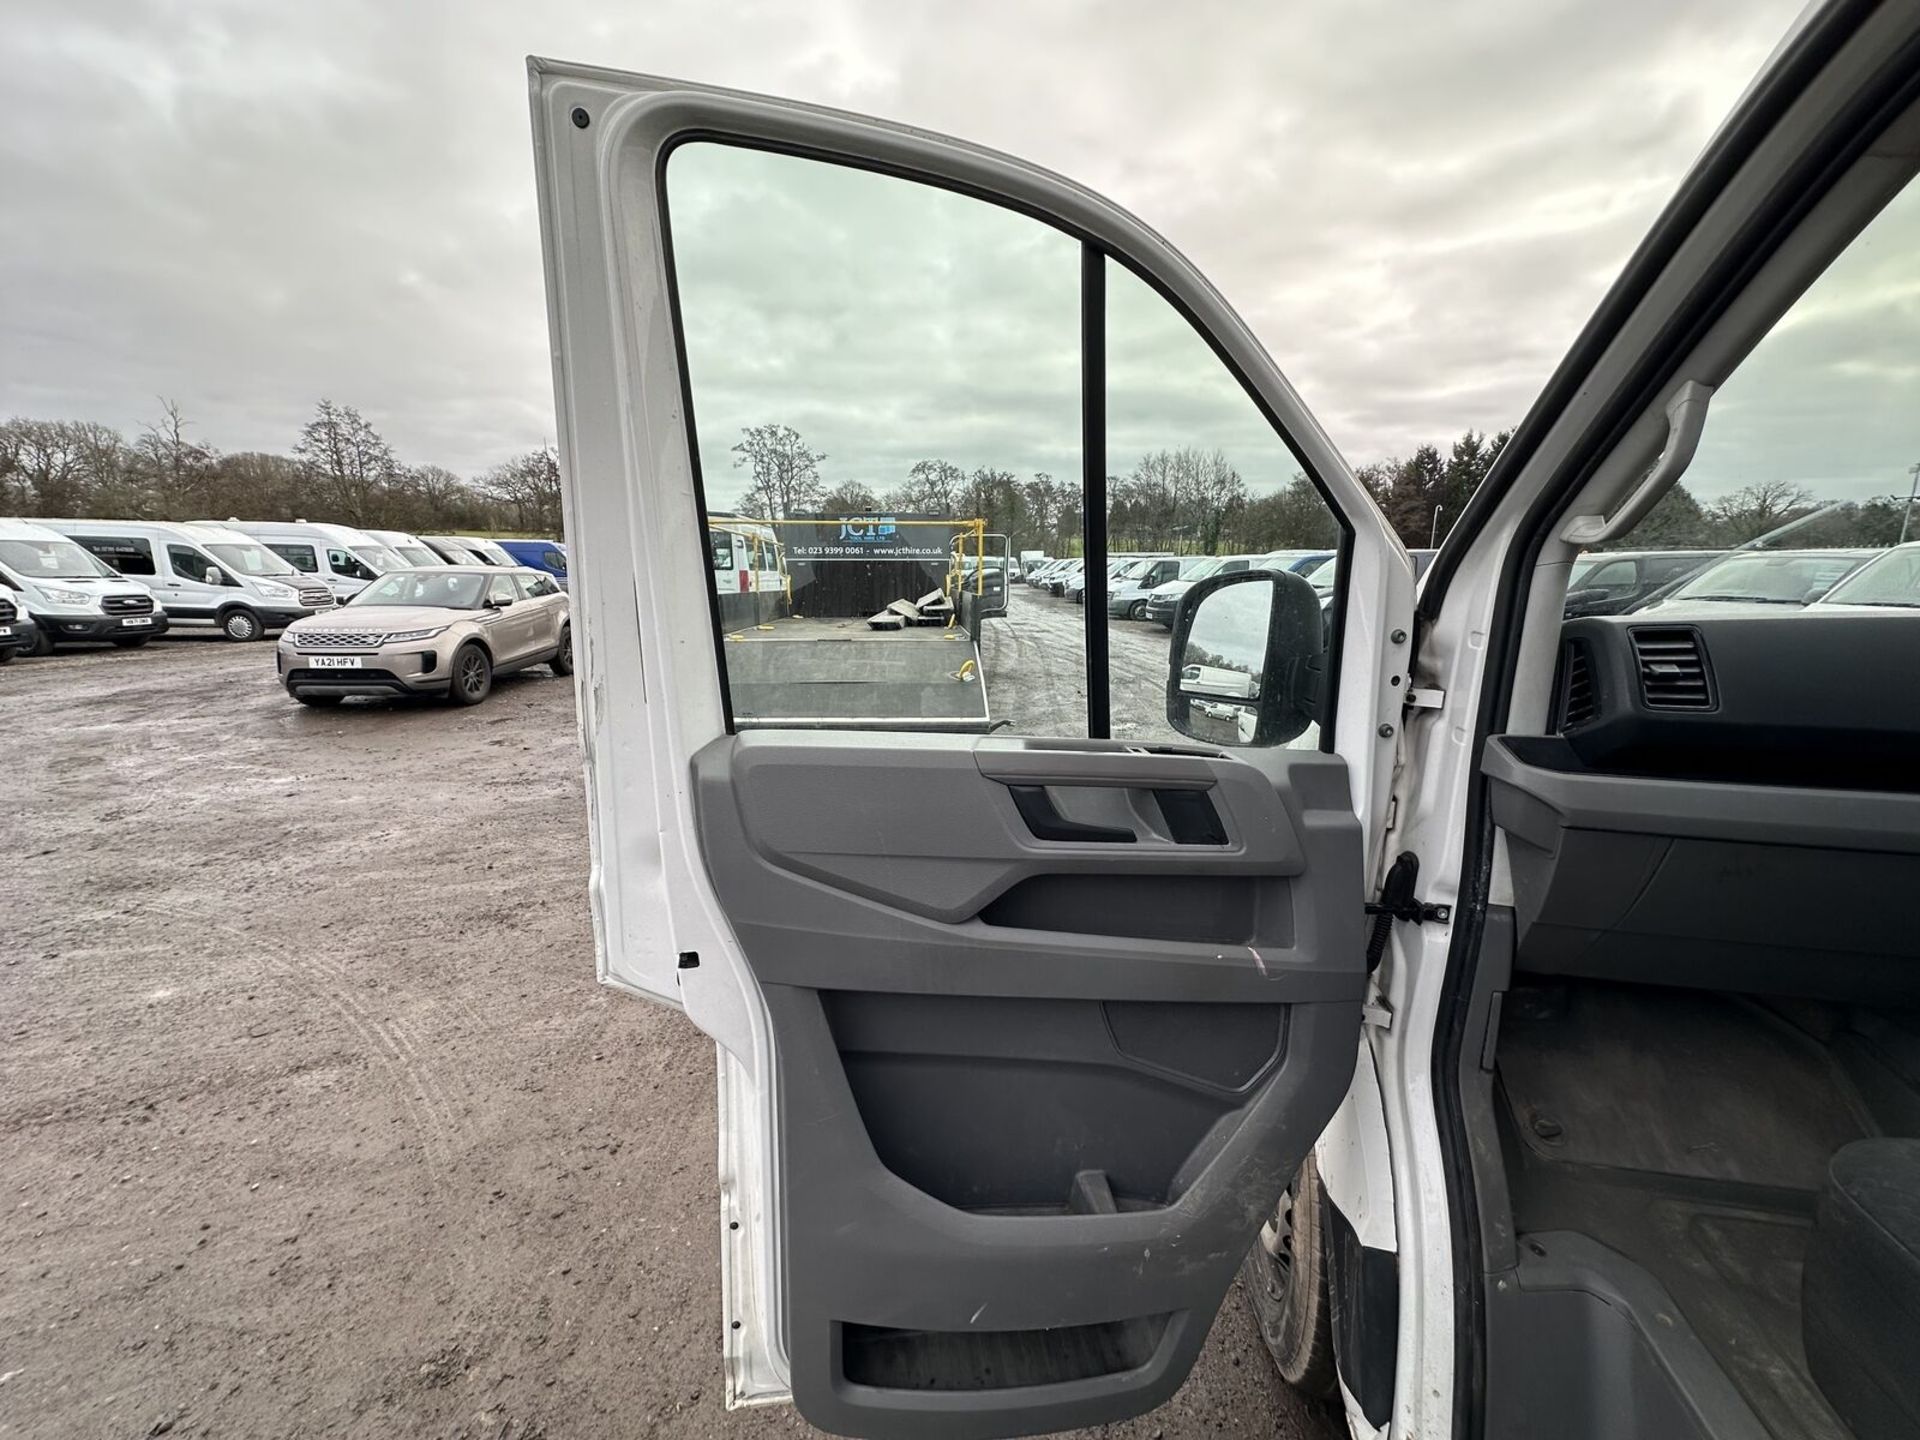 DEPENDABLE DRIVE: 2018 VW CRAFTER CR35 LWB 2.0 TDI FWD - Image 13 of 16